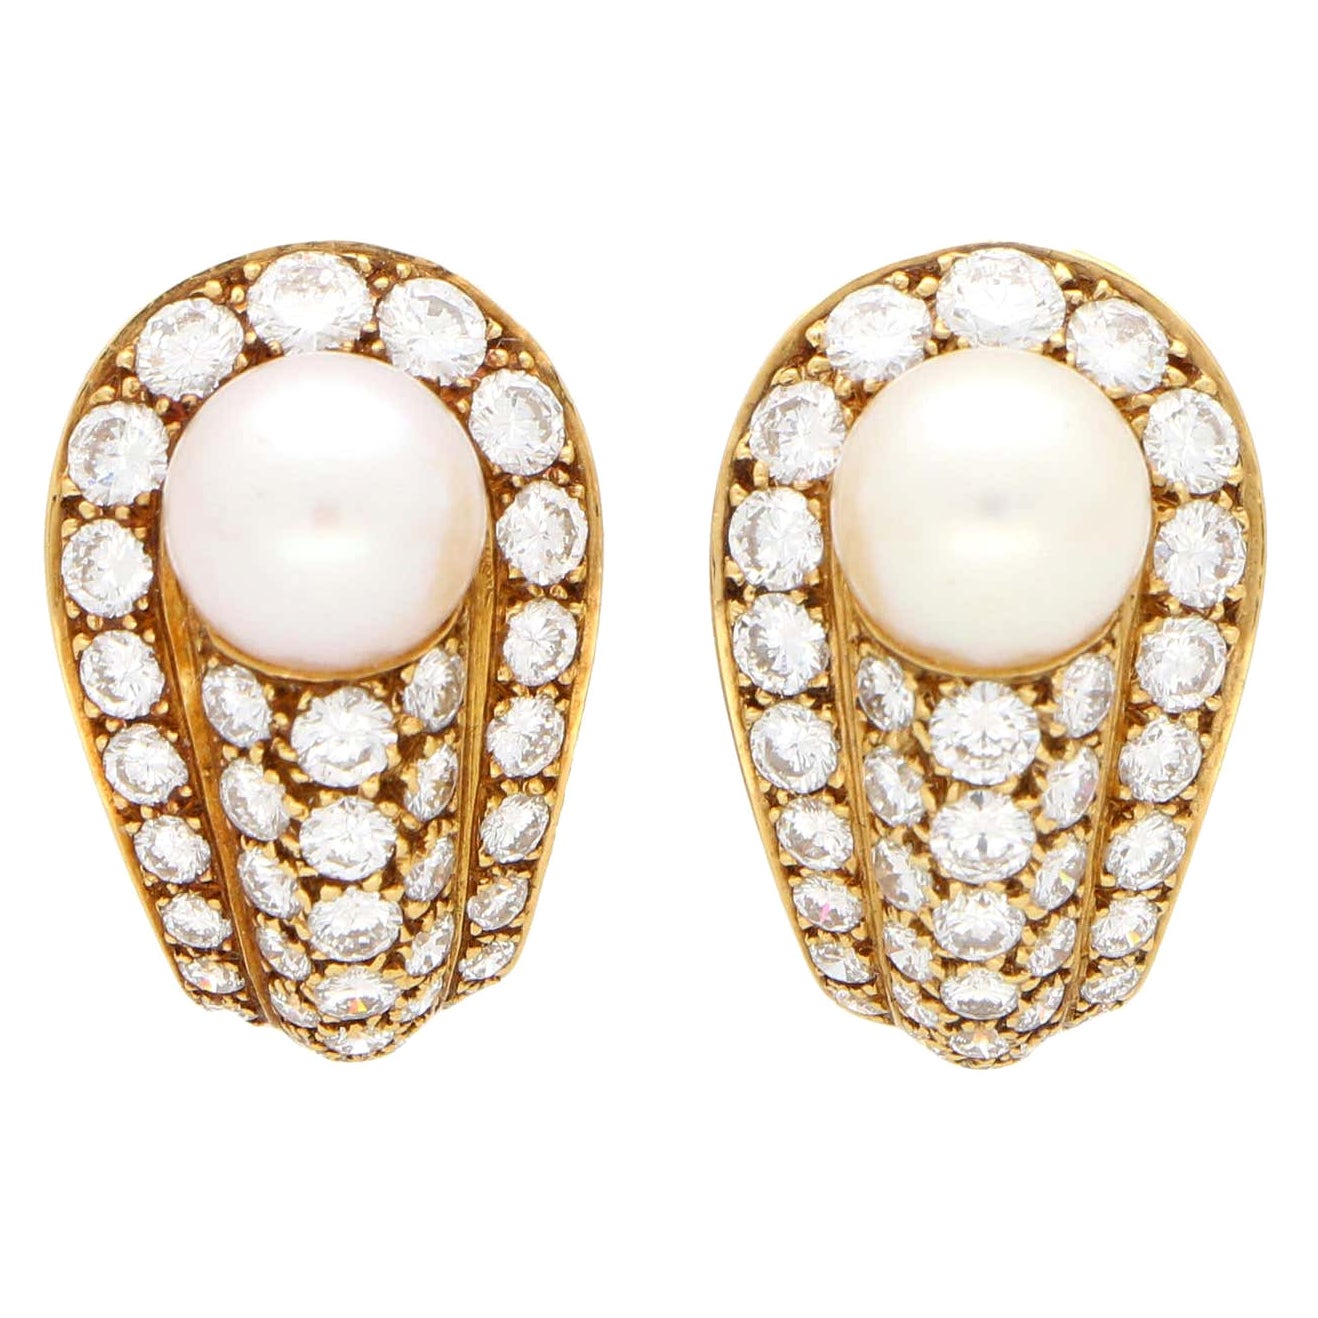 Vintage Cartier Pearl and Diamond Earrings Set in 18 Karat Yellow Gold